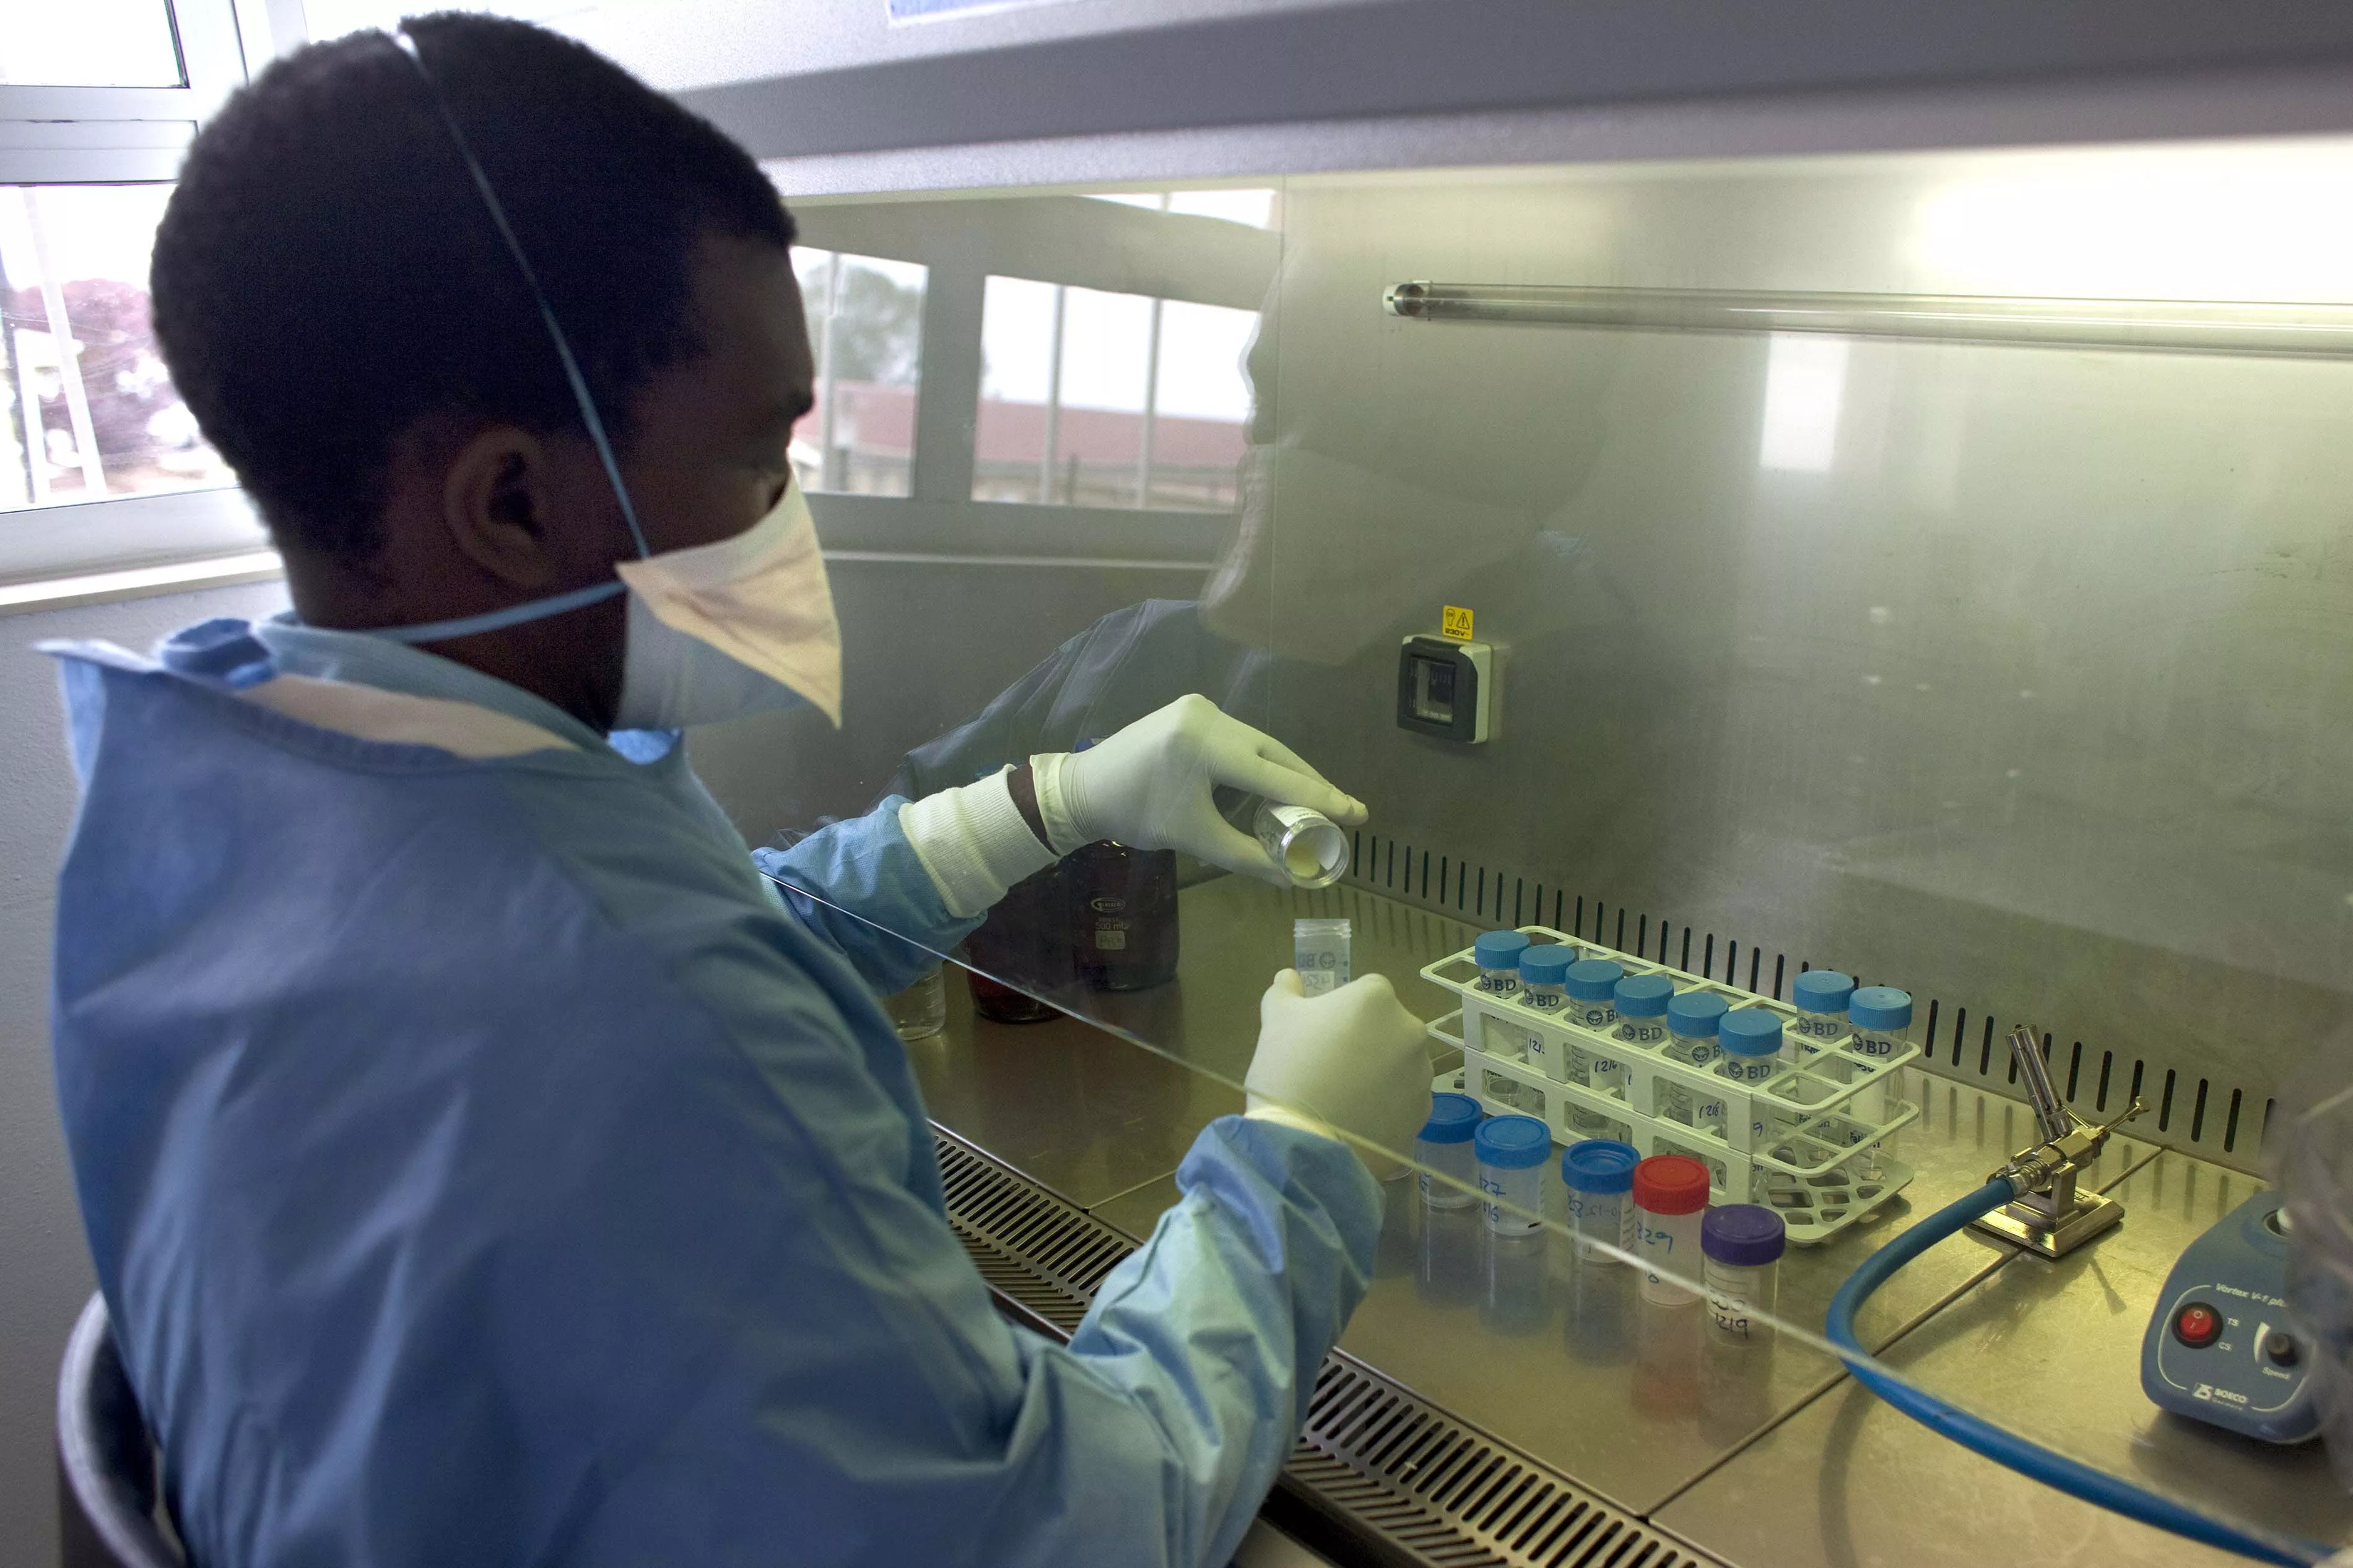 MSF lab technician working in the lab at the Nhlangano TB ward in Shiselweni, Swaziland. Photograph by Giorgos Moutafis